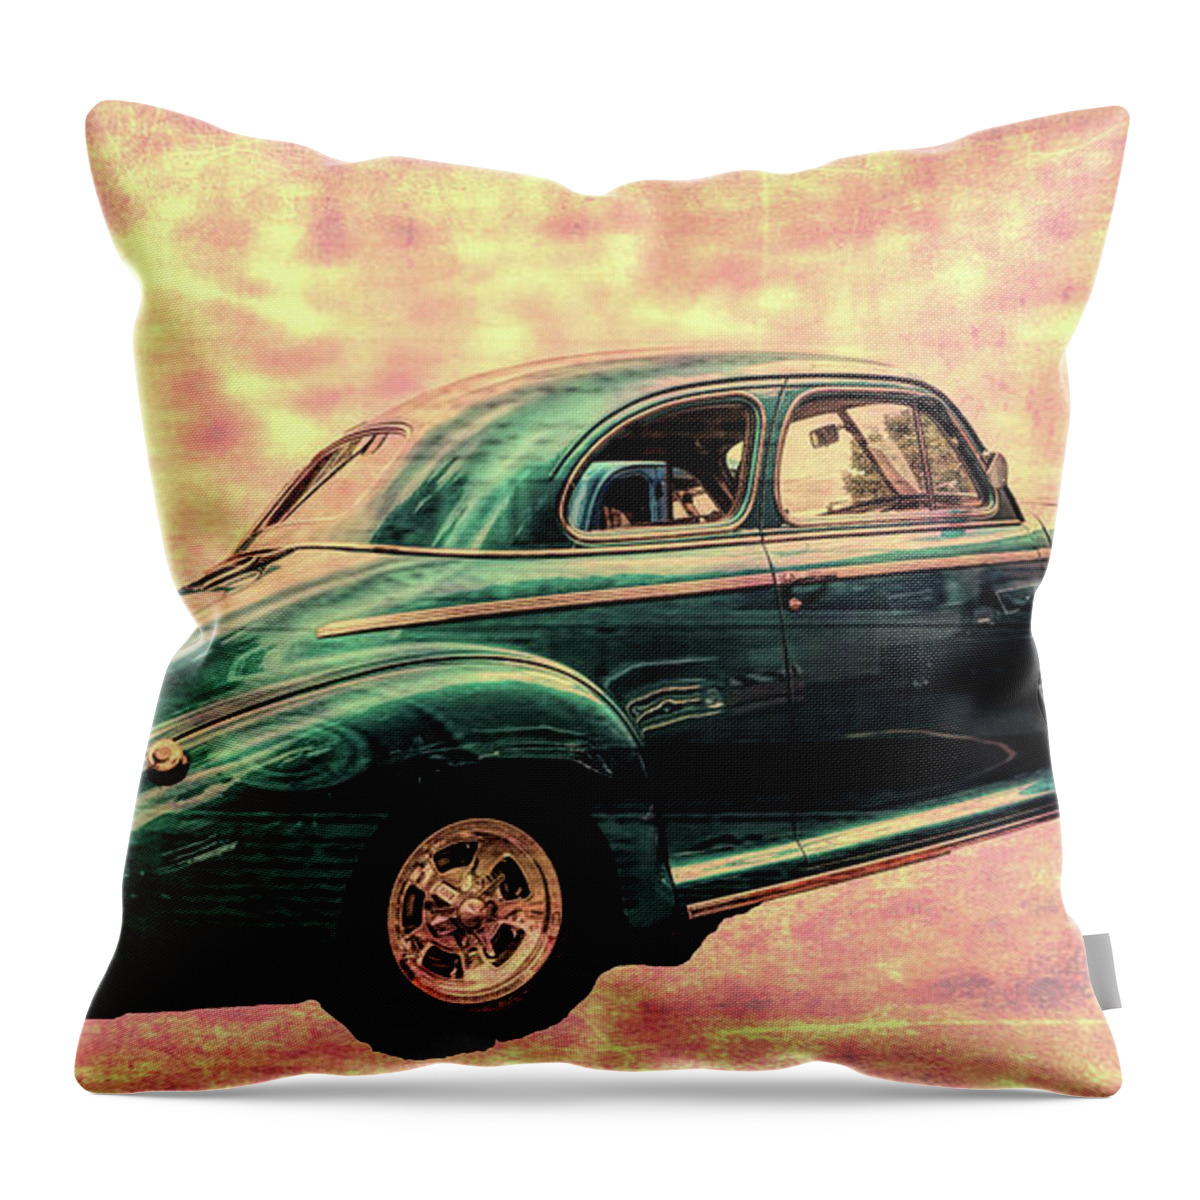 Ar Throw Pillow featuring the digital art Classic Car by Cathy Anderson